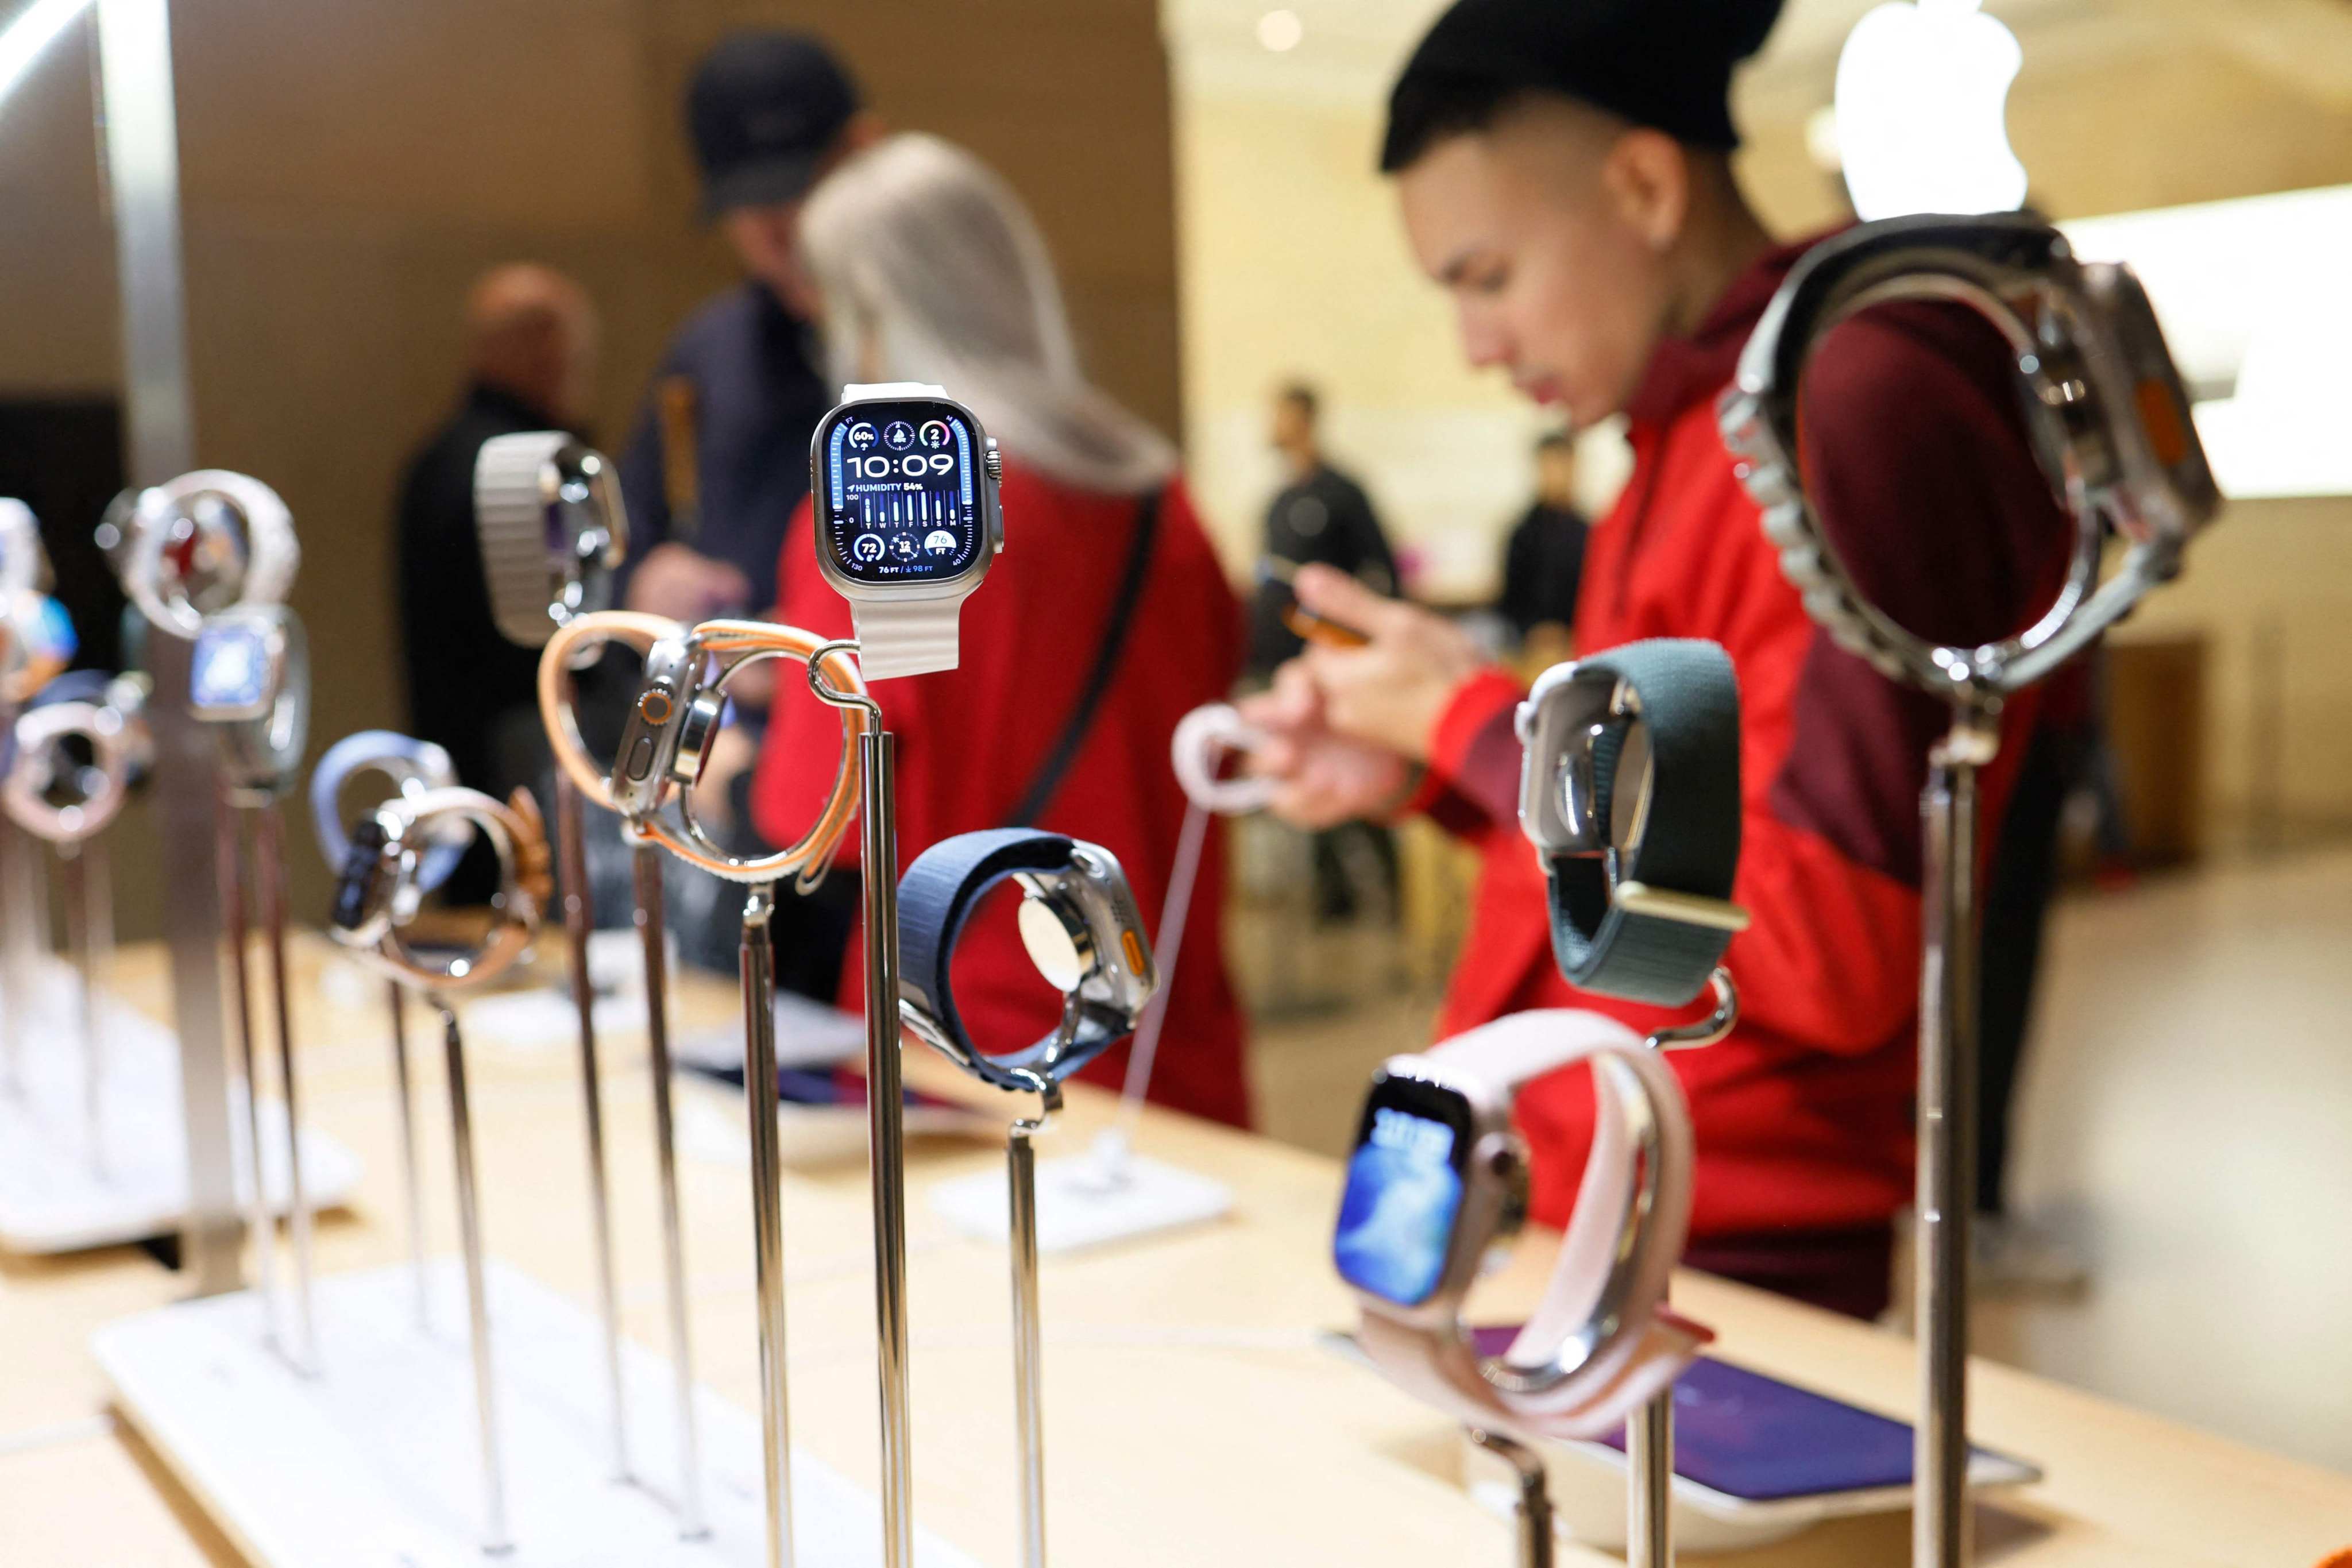 Shoppers check out the Apple Watches on display at an Apple Store in New York. Photo: Getty Images via AFP